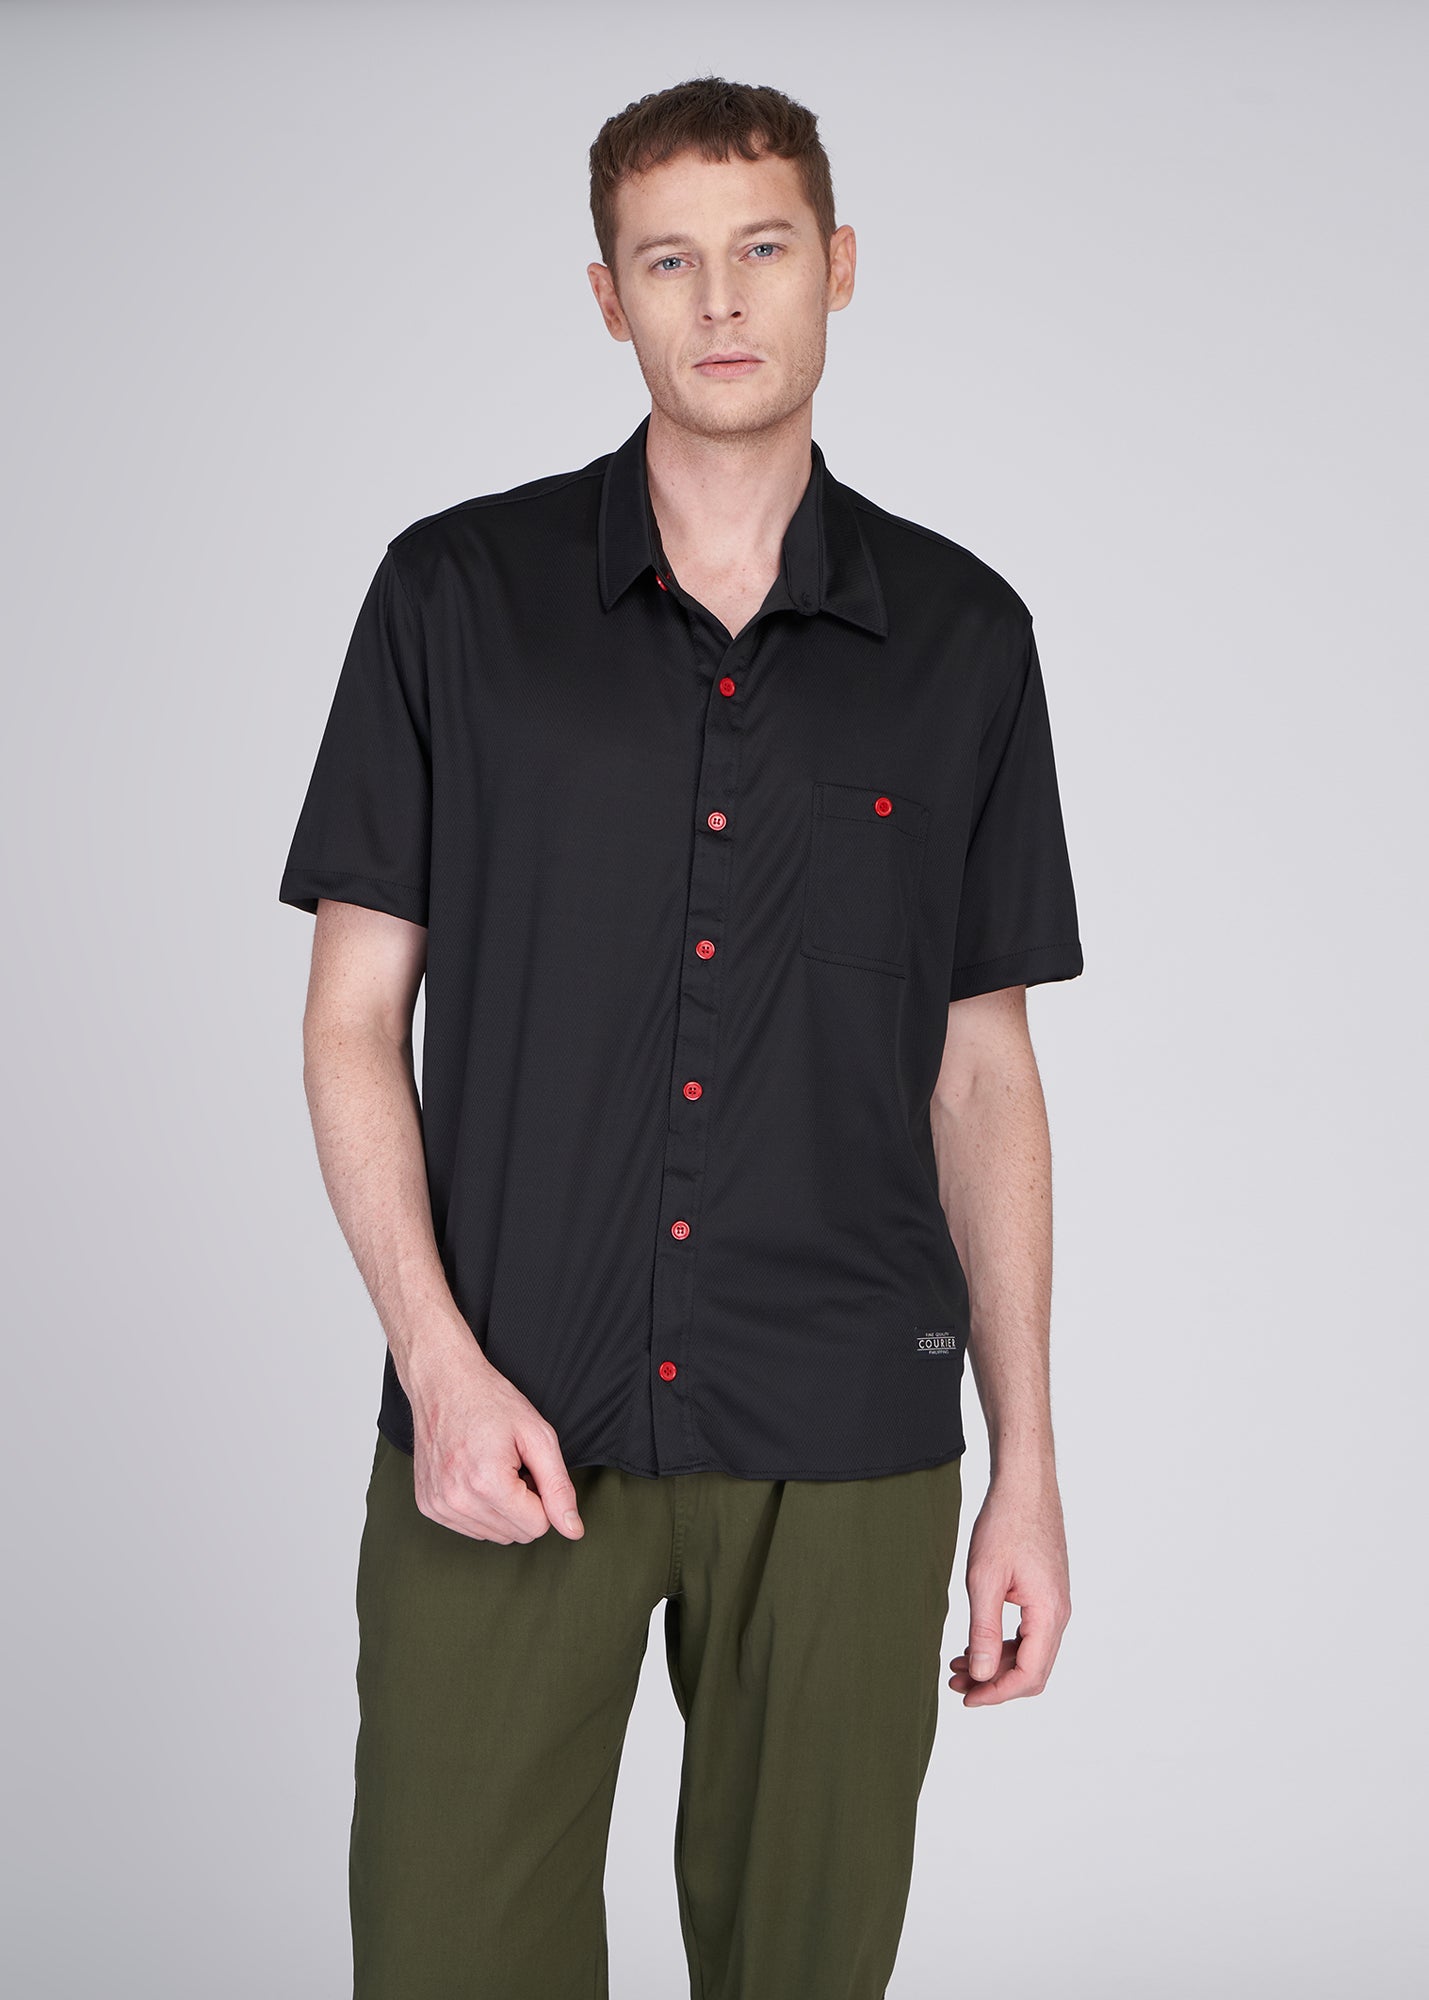 Courier PH Men's Button Down : SPORTS JERSEY